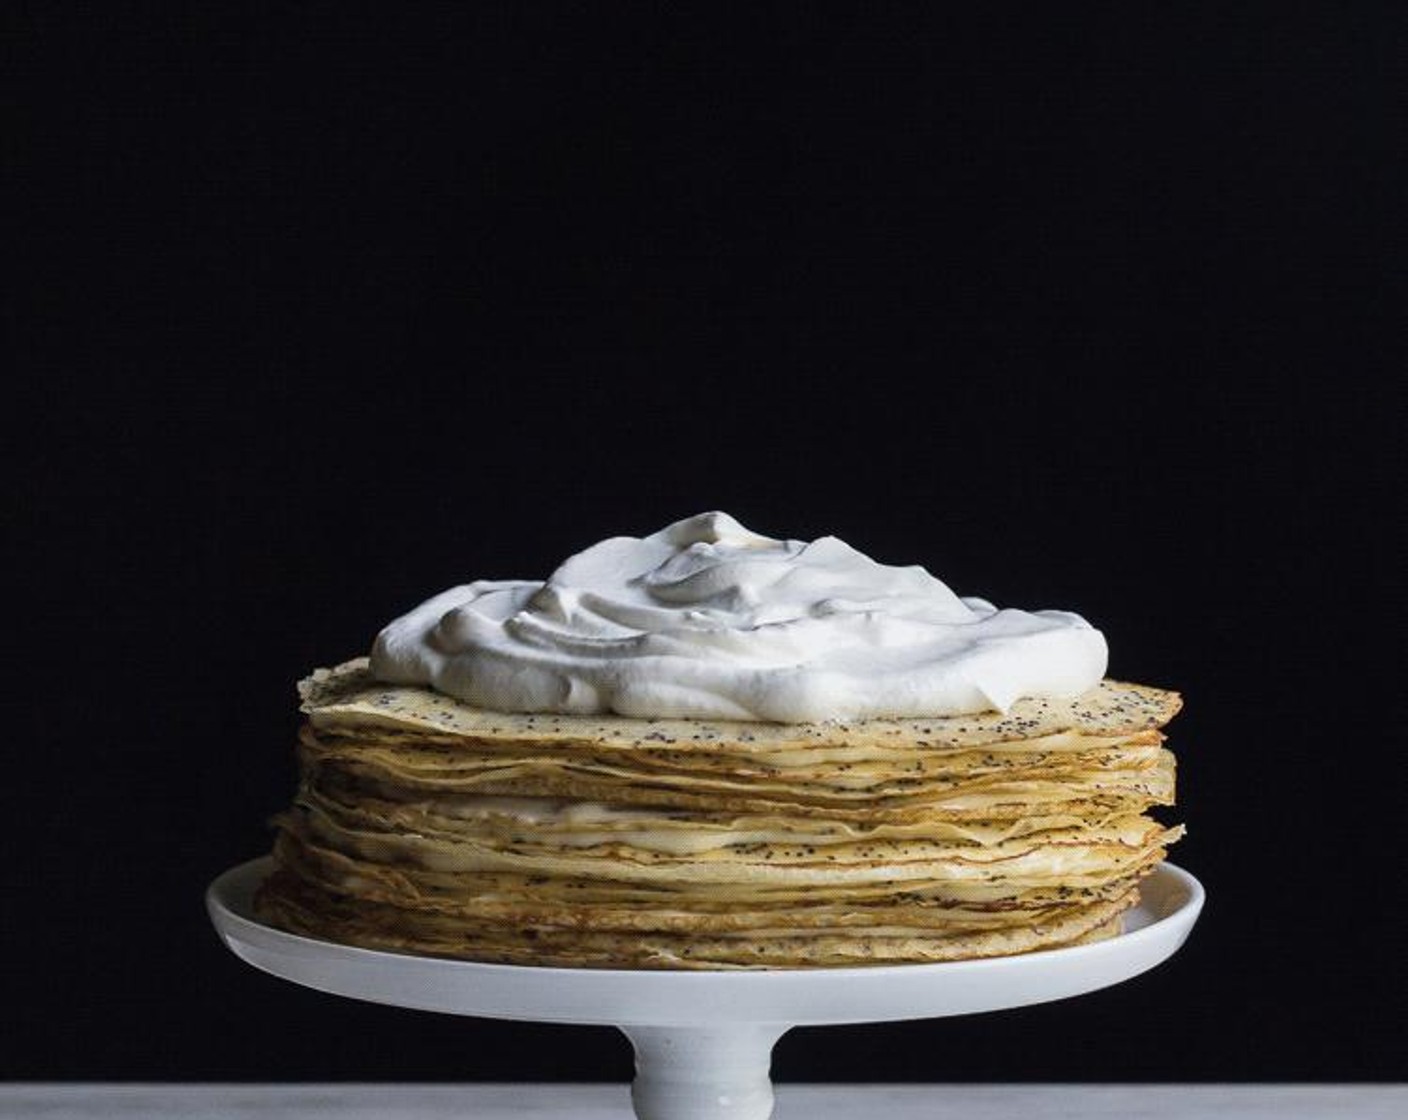 step 15 When ready to serve, whip Whipping Cream (1/2 cup) into soft peaks, top crepe cake with whipped cream and candied lemon slices.